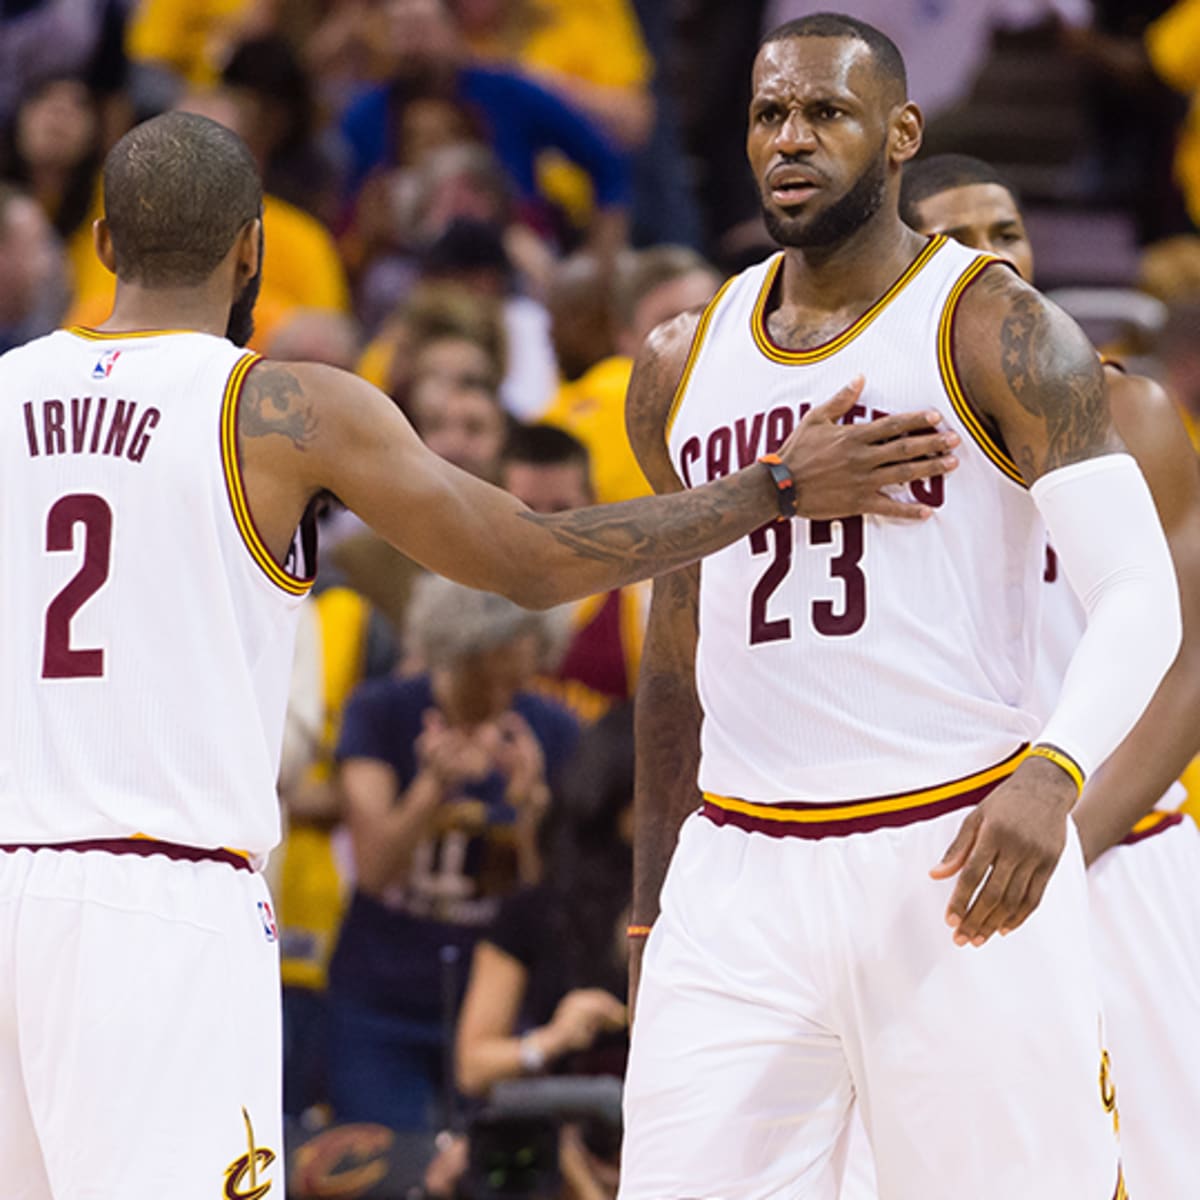 LeBron's late defense helps Cavs edge Heat without Love